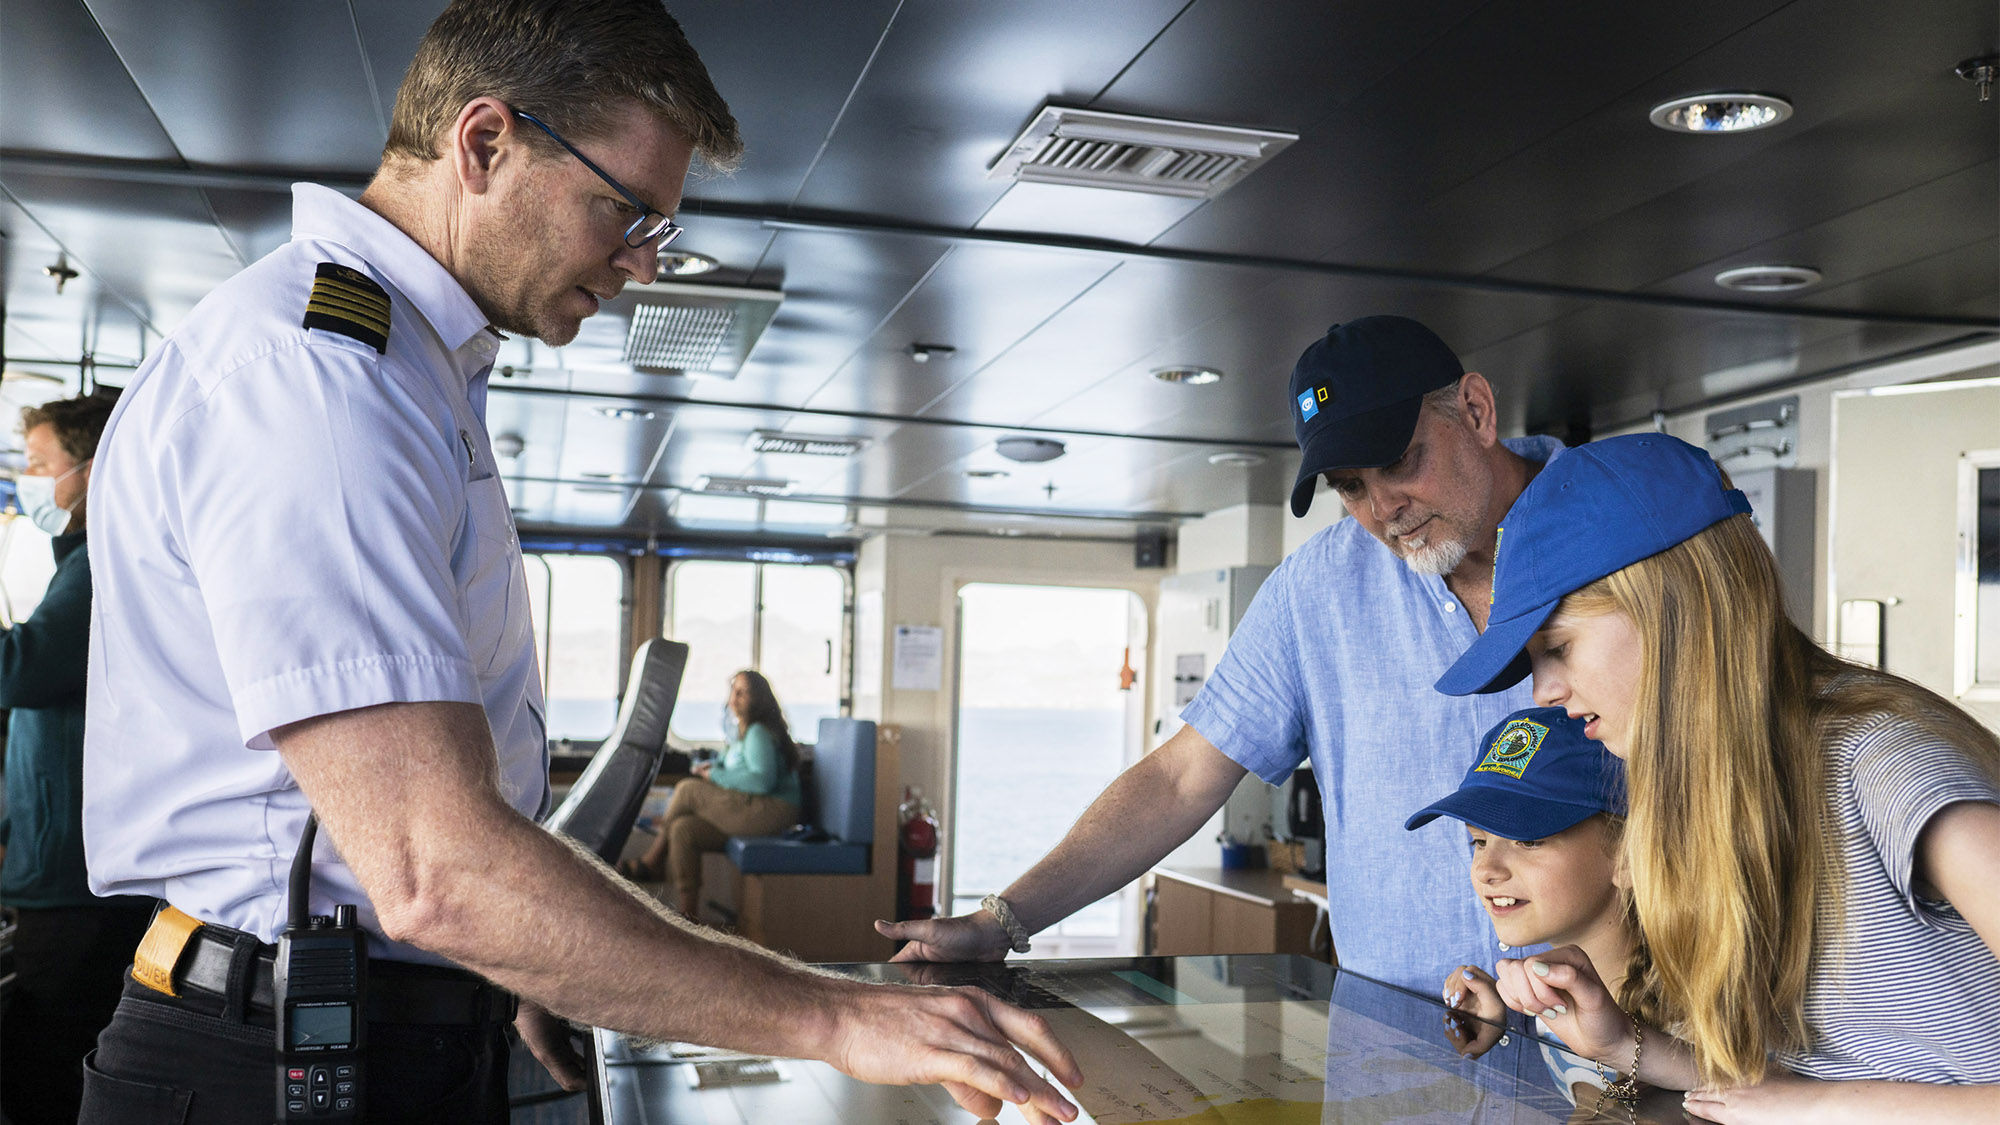 A learning experience aboard the National Geographic Venture. Lindblad says the educational aspect is a big draw with grandparents who book cruises.